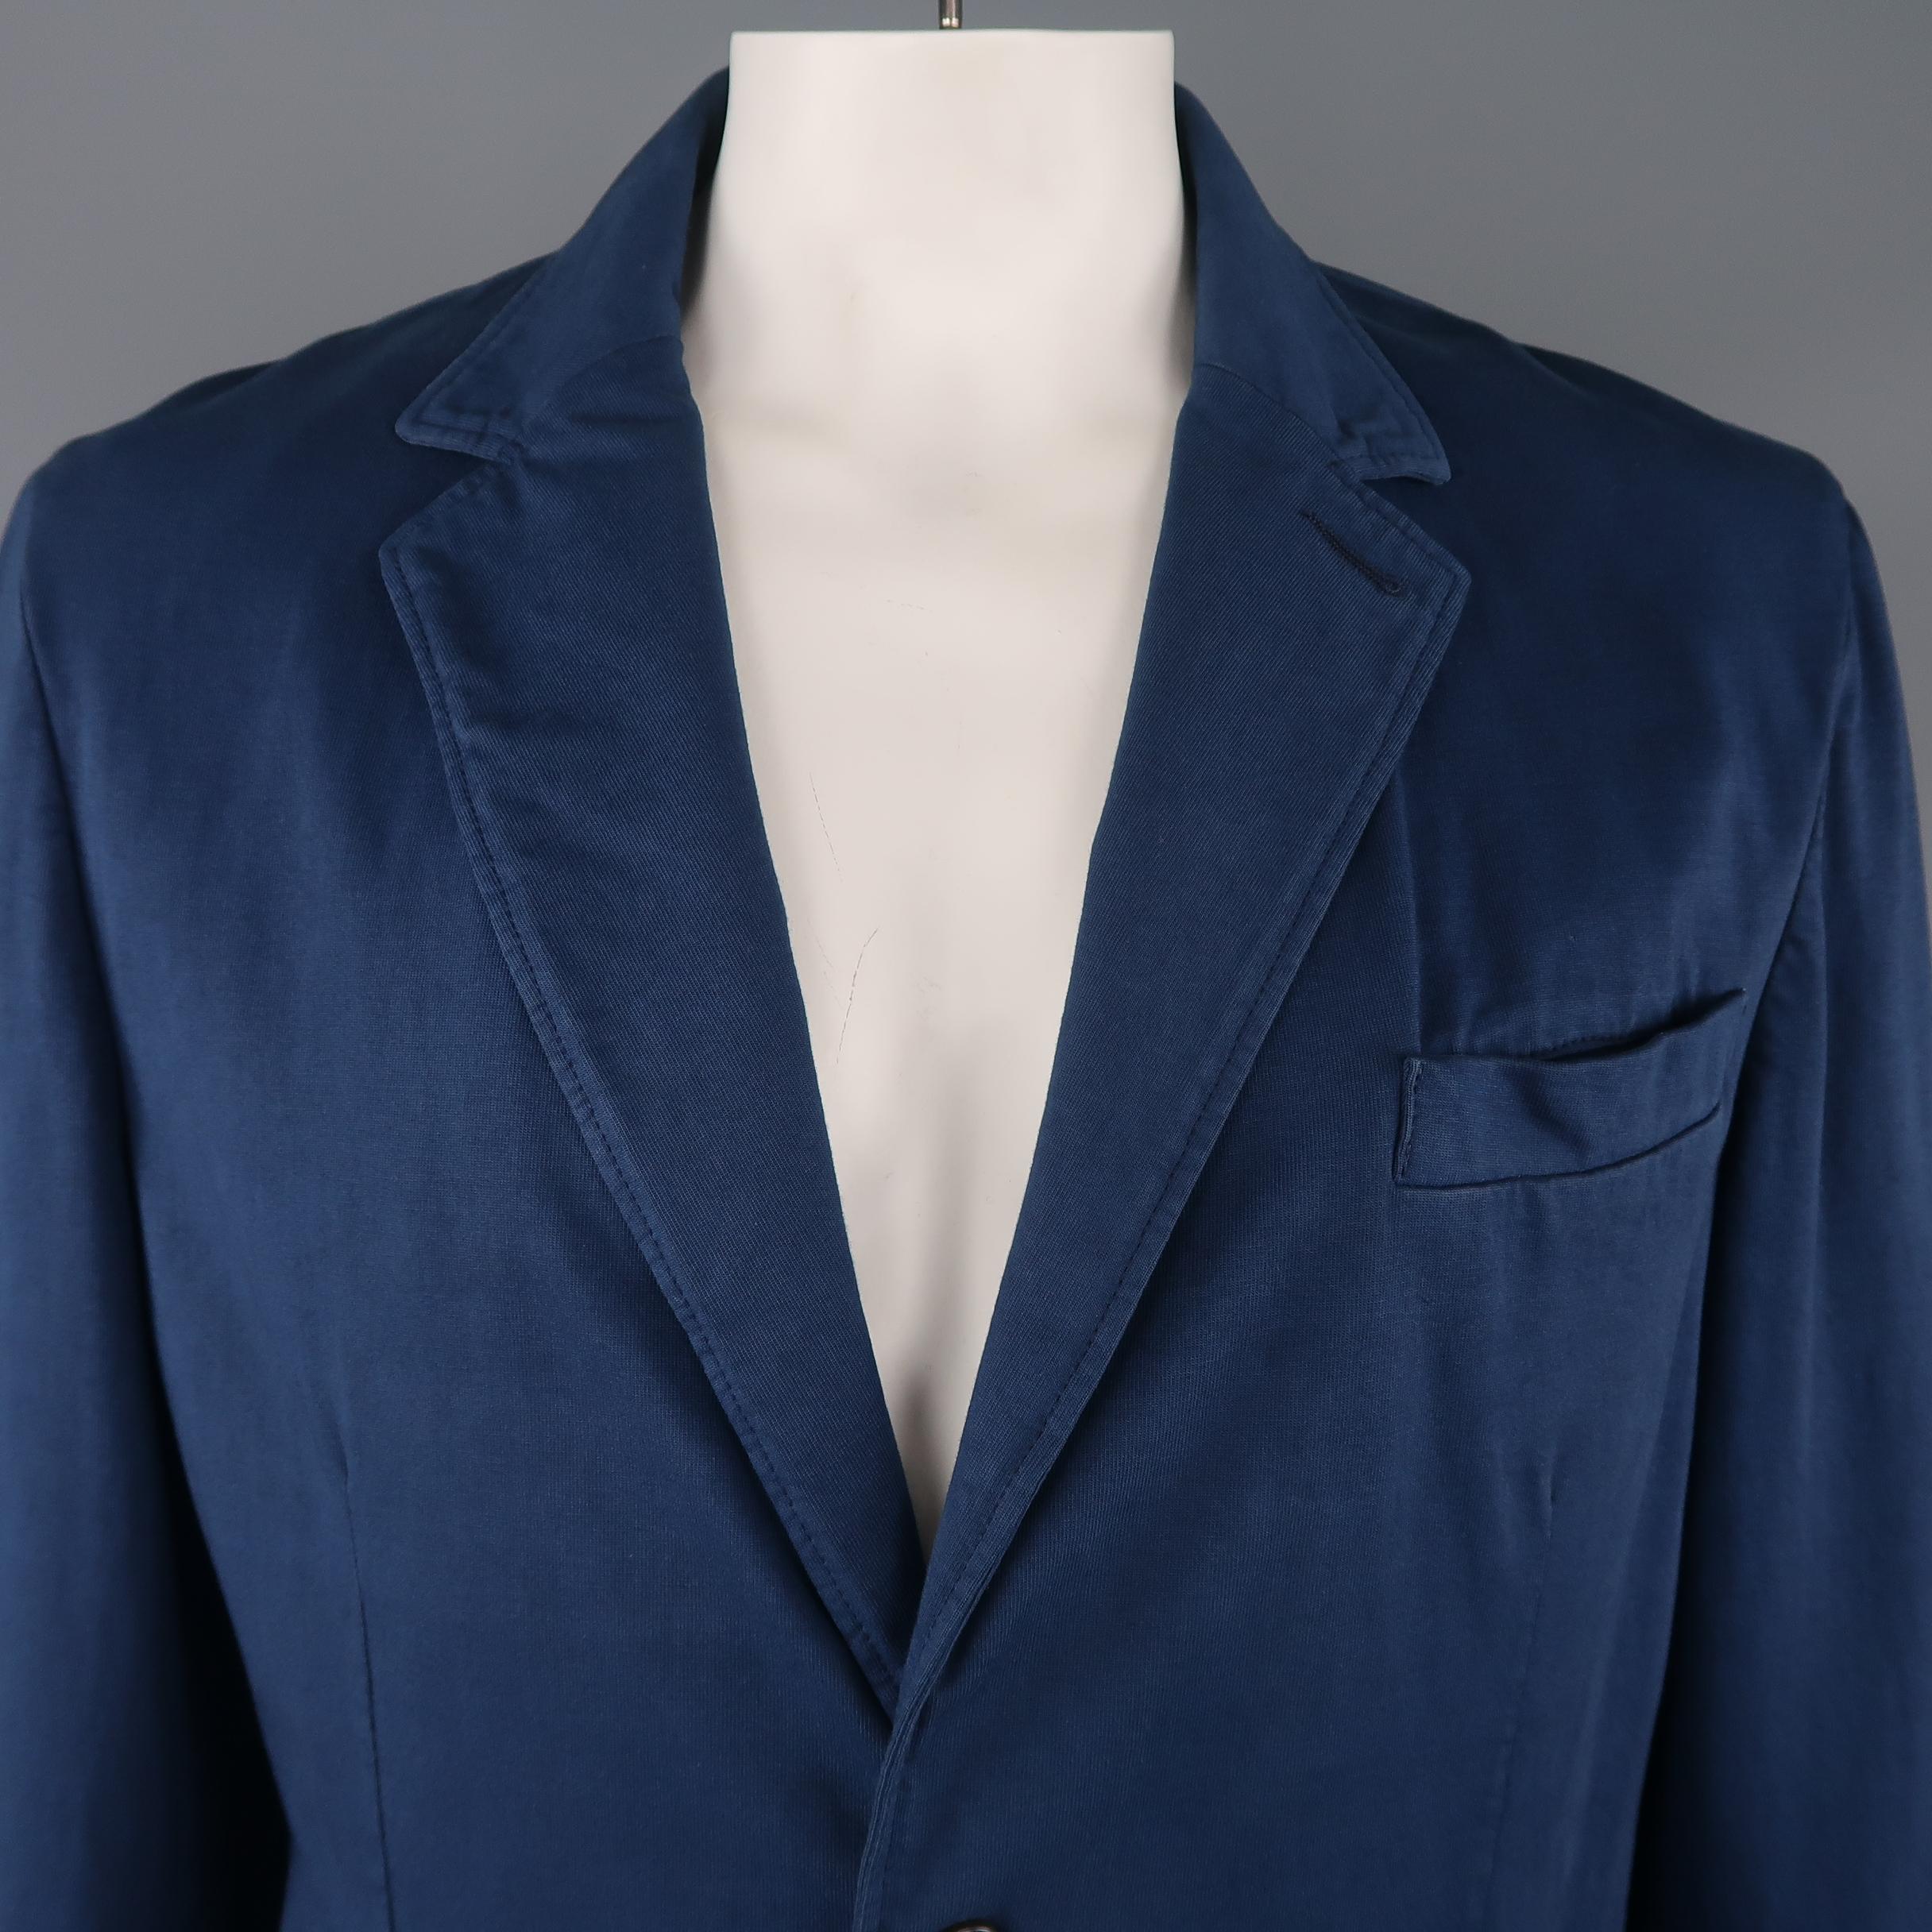 CLOSED casual sport coat jacket comes in muted navy blue jersey with a notch lapel, two button, single breasted front, and patch pockets. Made in Italy.
 
Very Good Pre-Owned Condition.
Marked: IT 52
 
Measurements:
 
Shoulder: 19 in.
Chest: 48